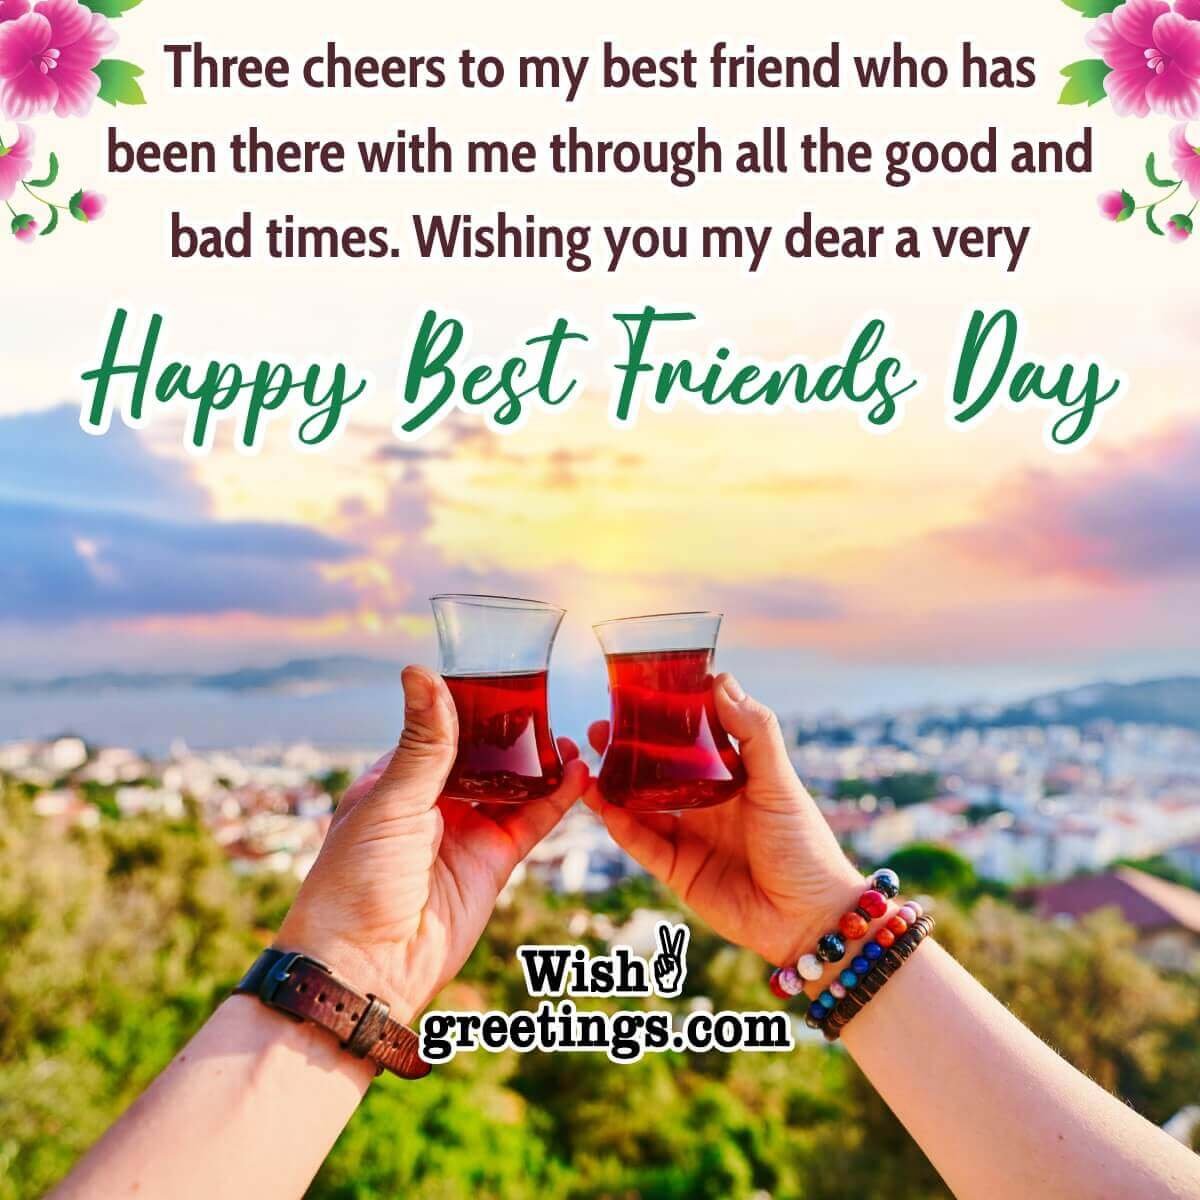 Best Friends Day Wishes Messages Wish Greetings